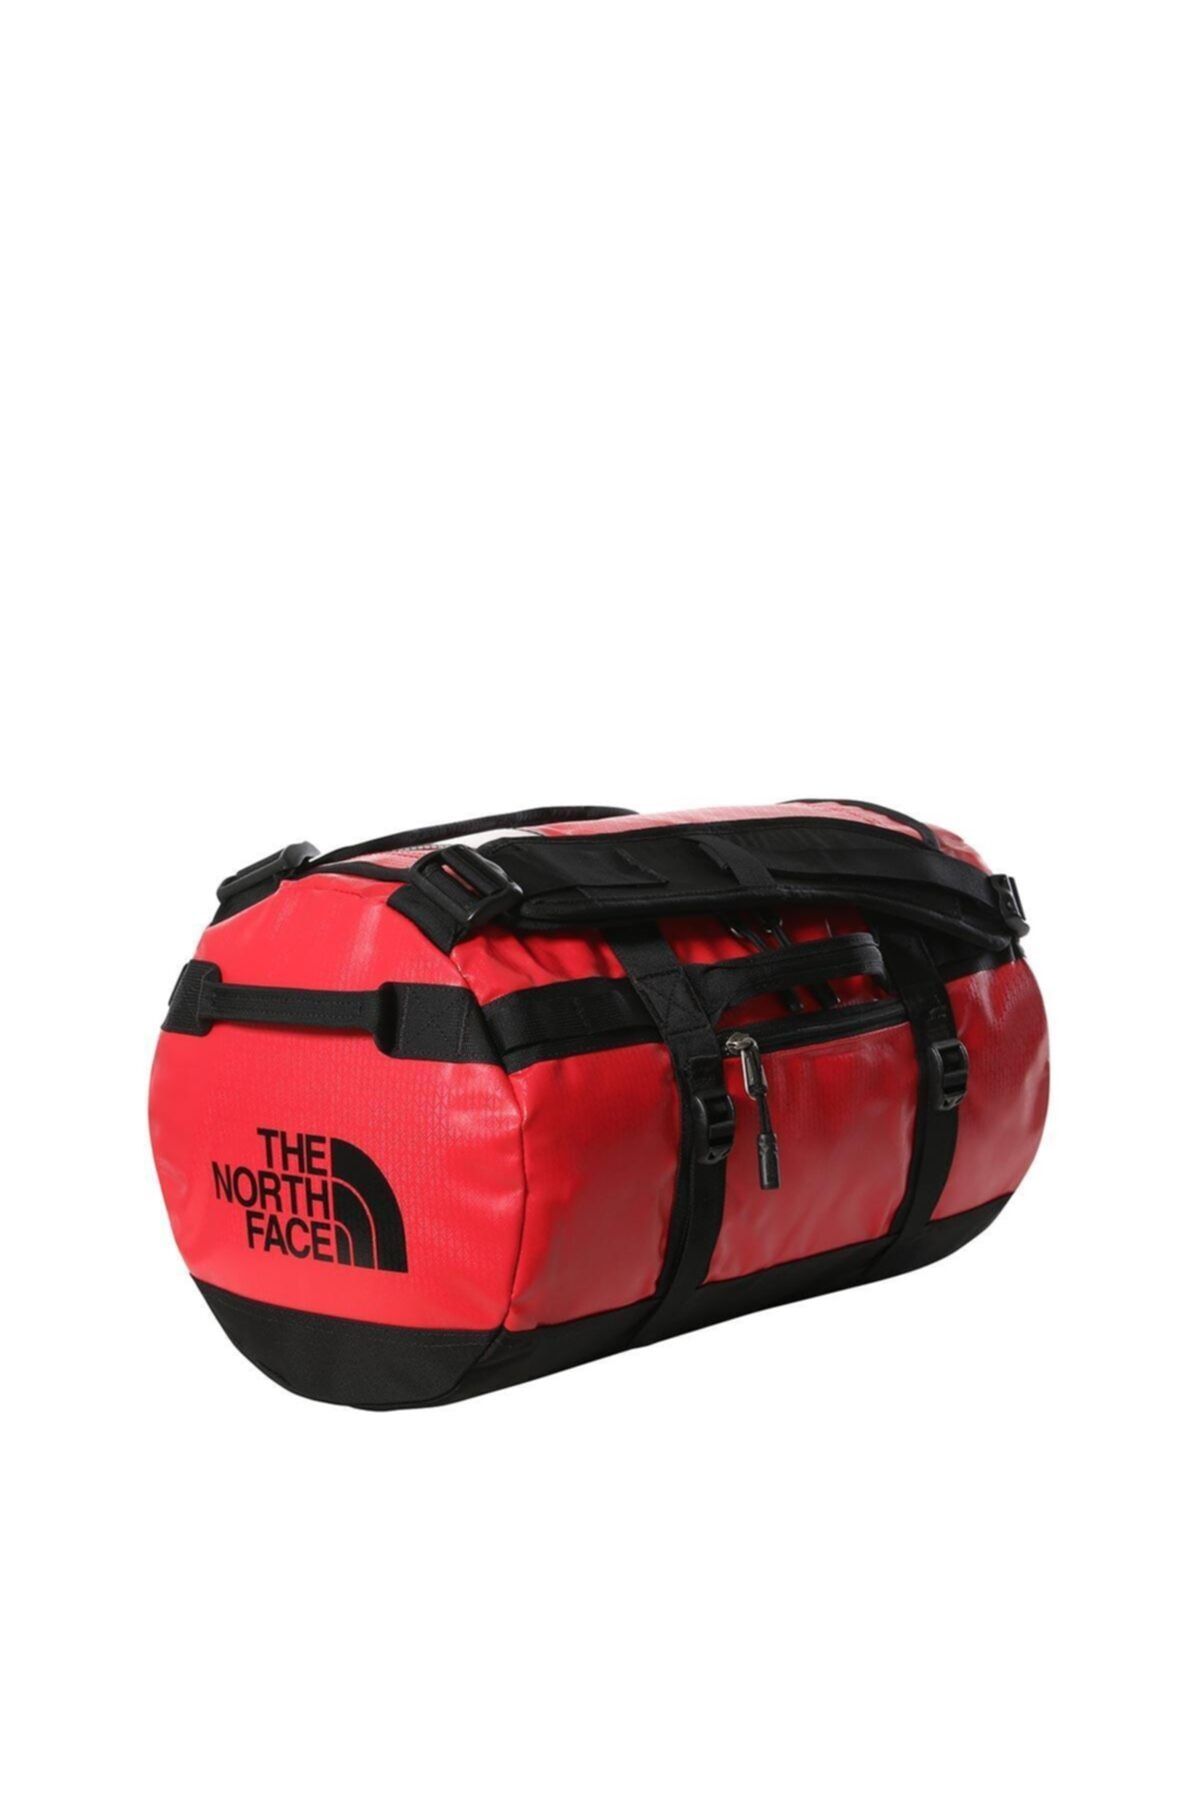 The North Face The Northface Base Camp Duffel-xs Nf0a52sskz31